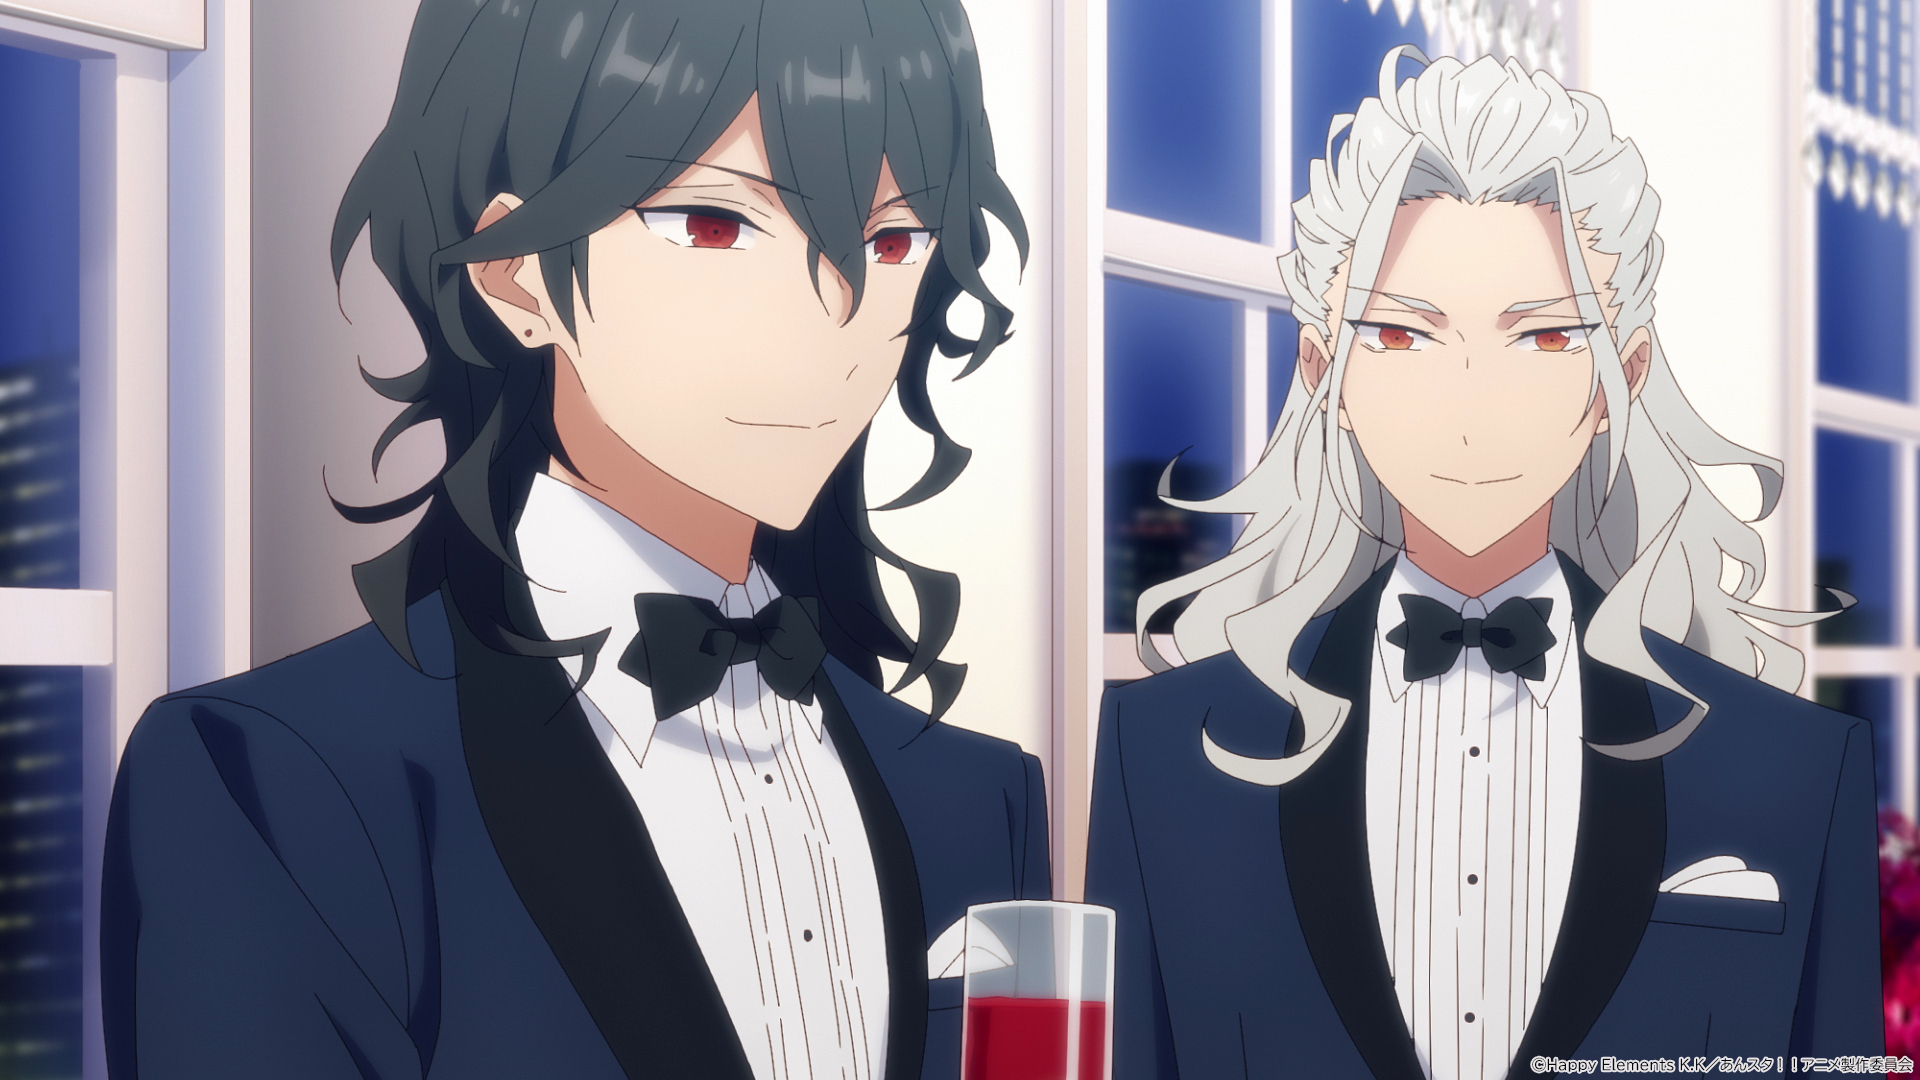 Rei and Nagisa in suits, with Rei drinking something red in a wine glass.